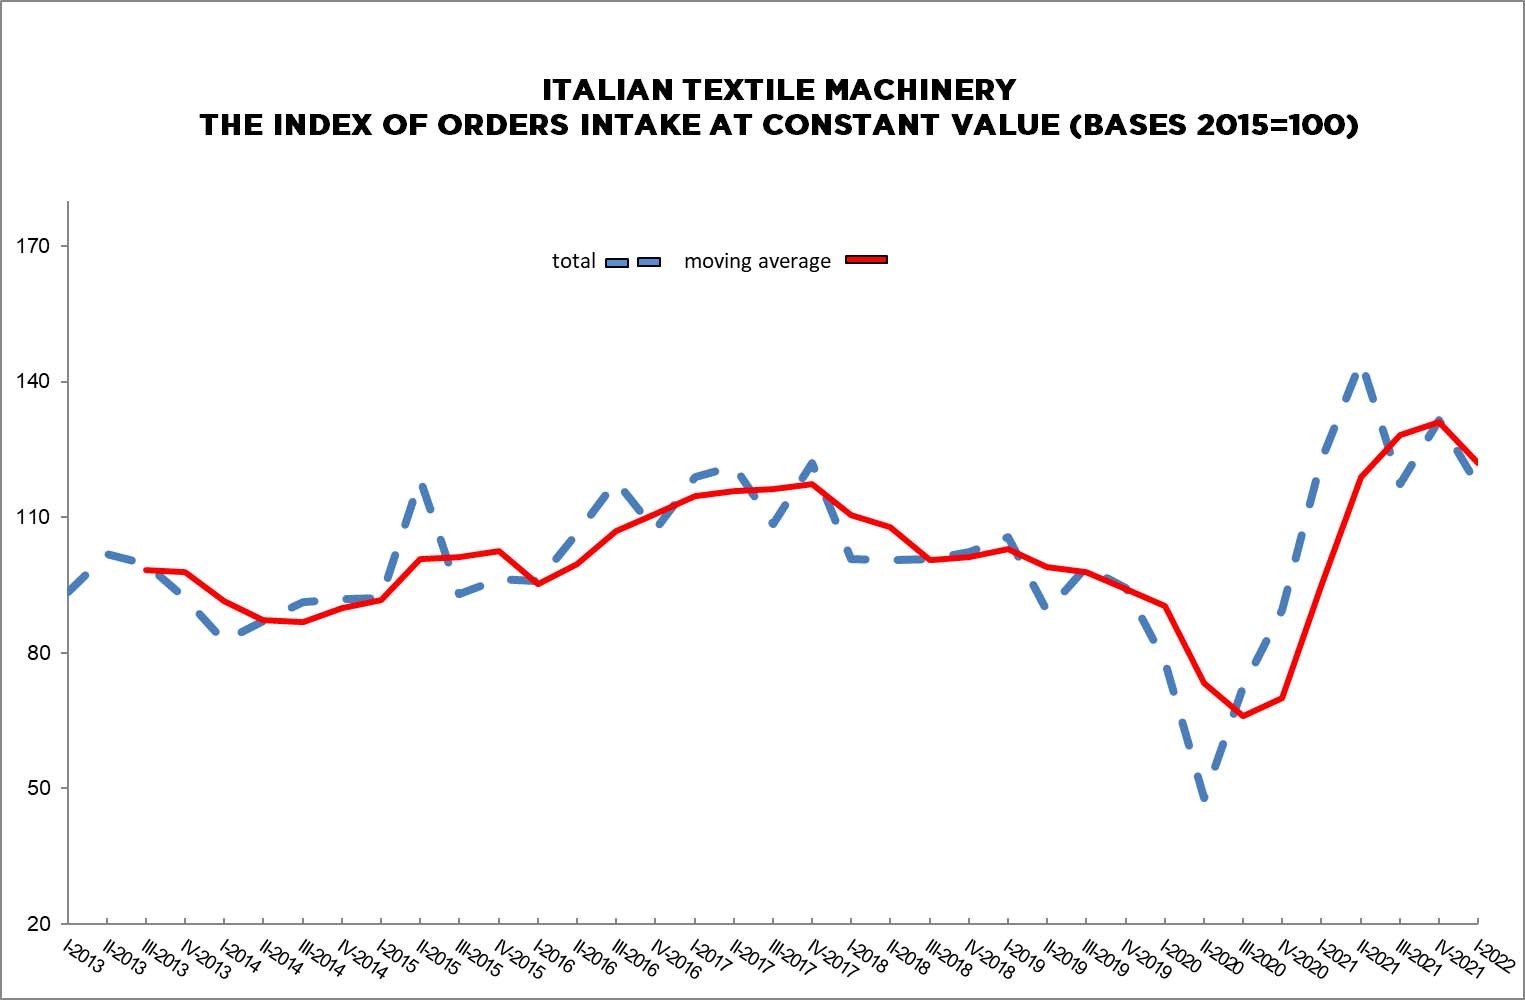 ITALIAN TEXTILE MACHINERY: DROP IN ORDERS FOR FIRST QUARTER 2022